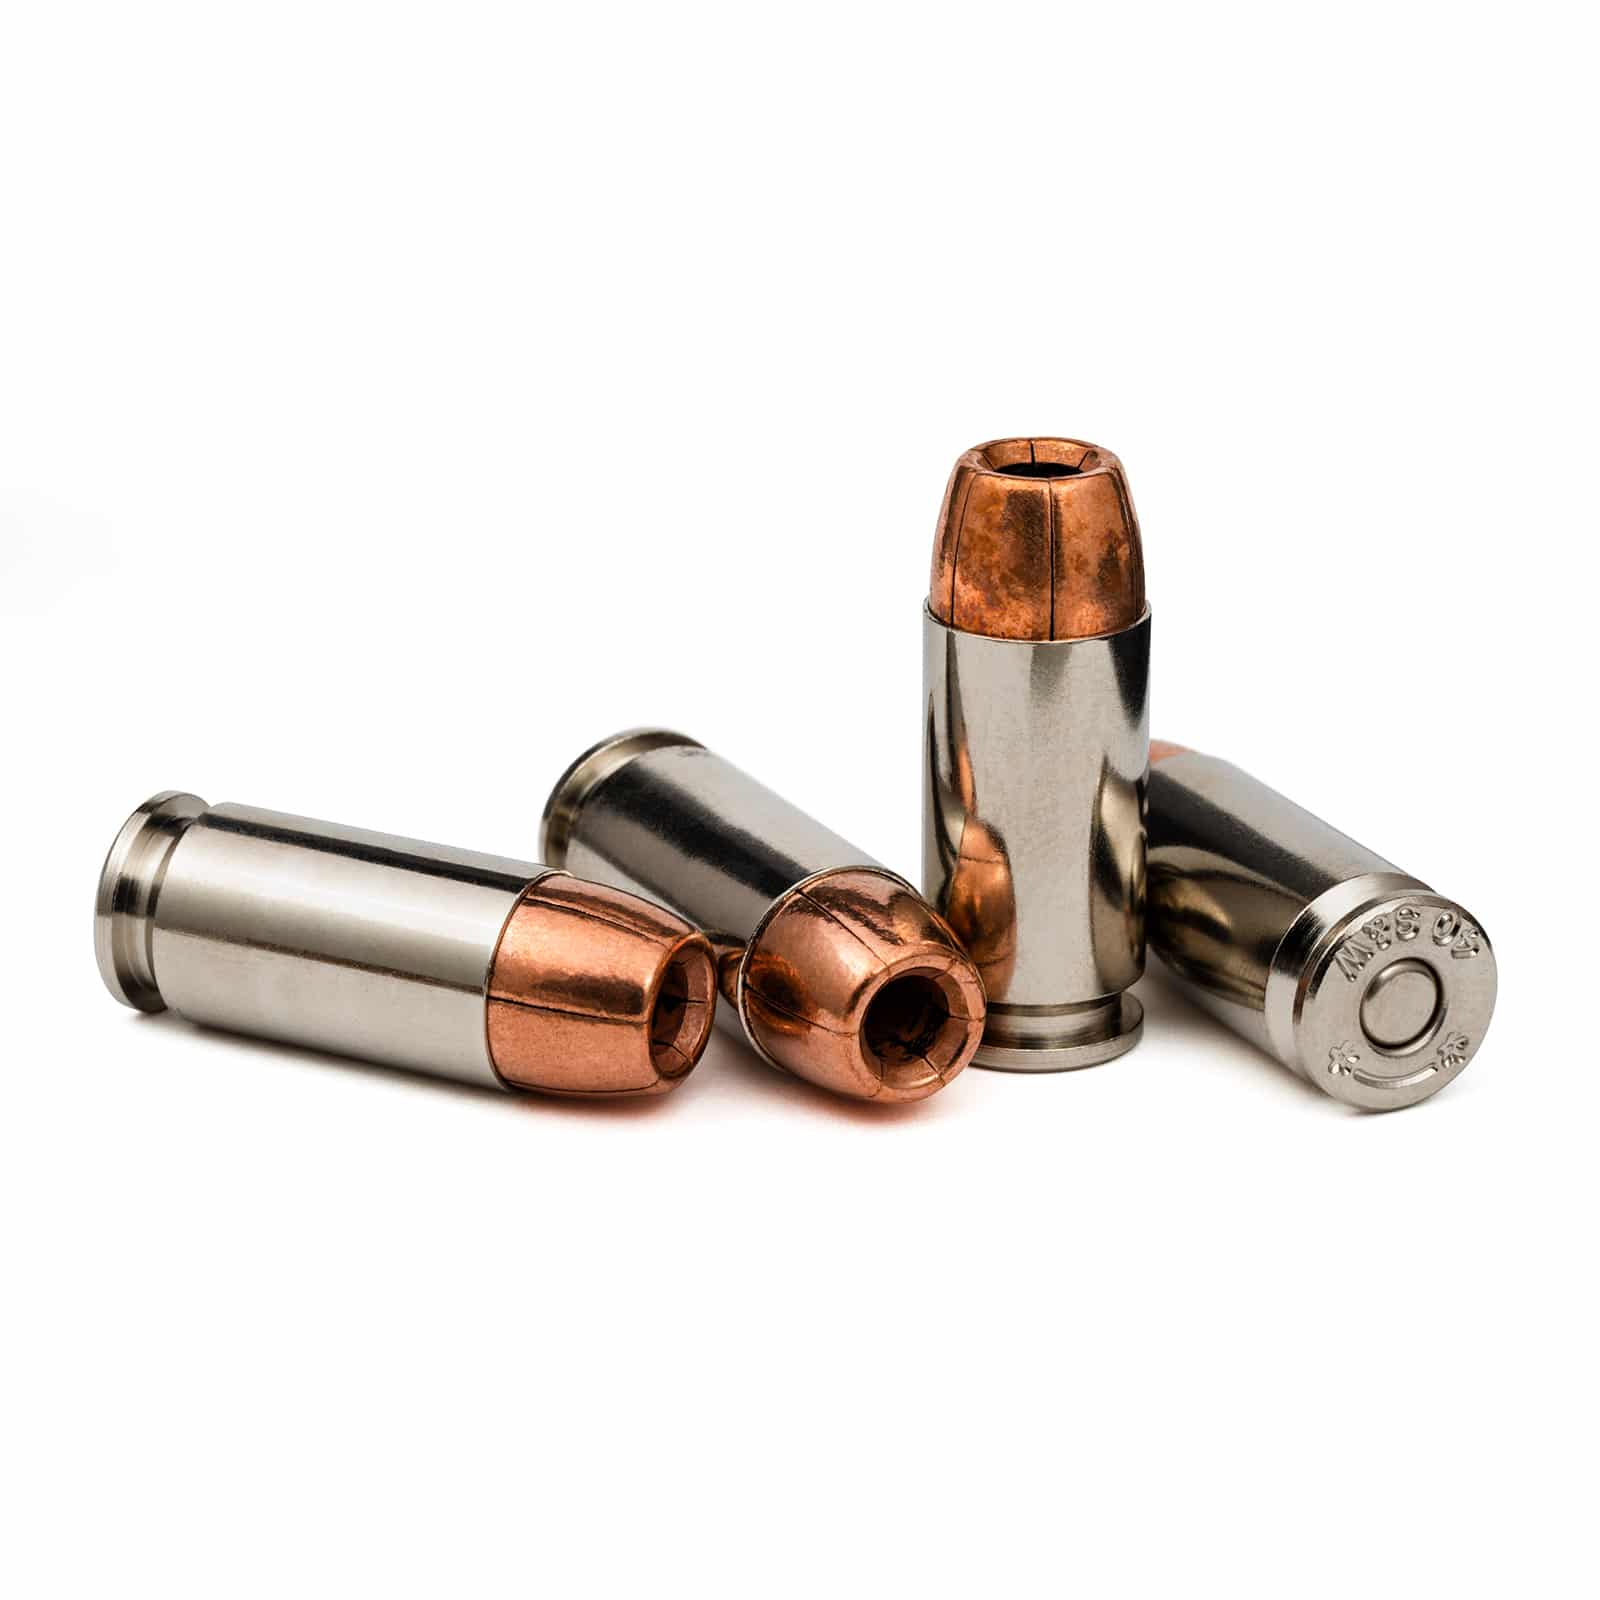 .40 S&W hollow point rounds